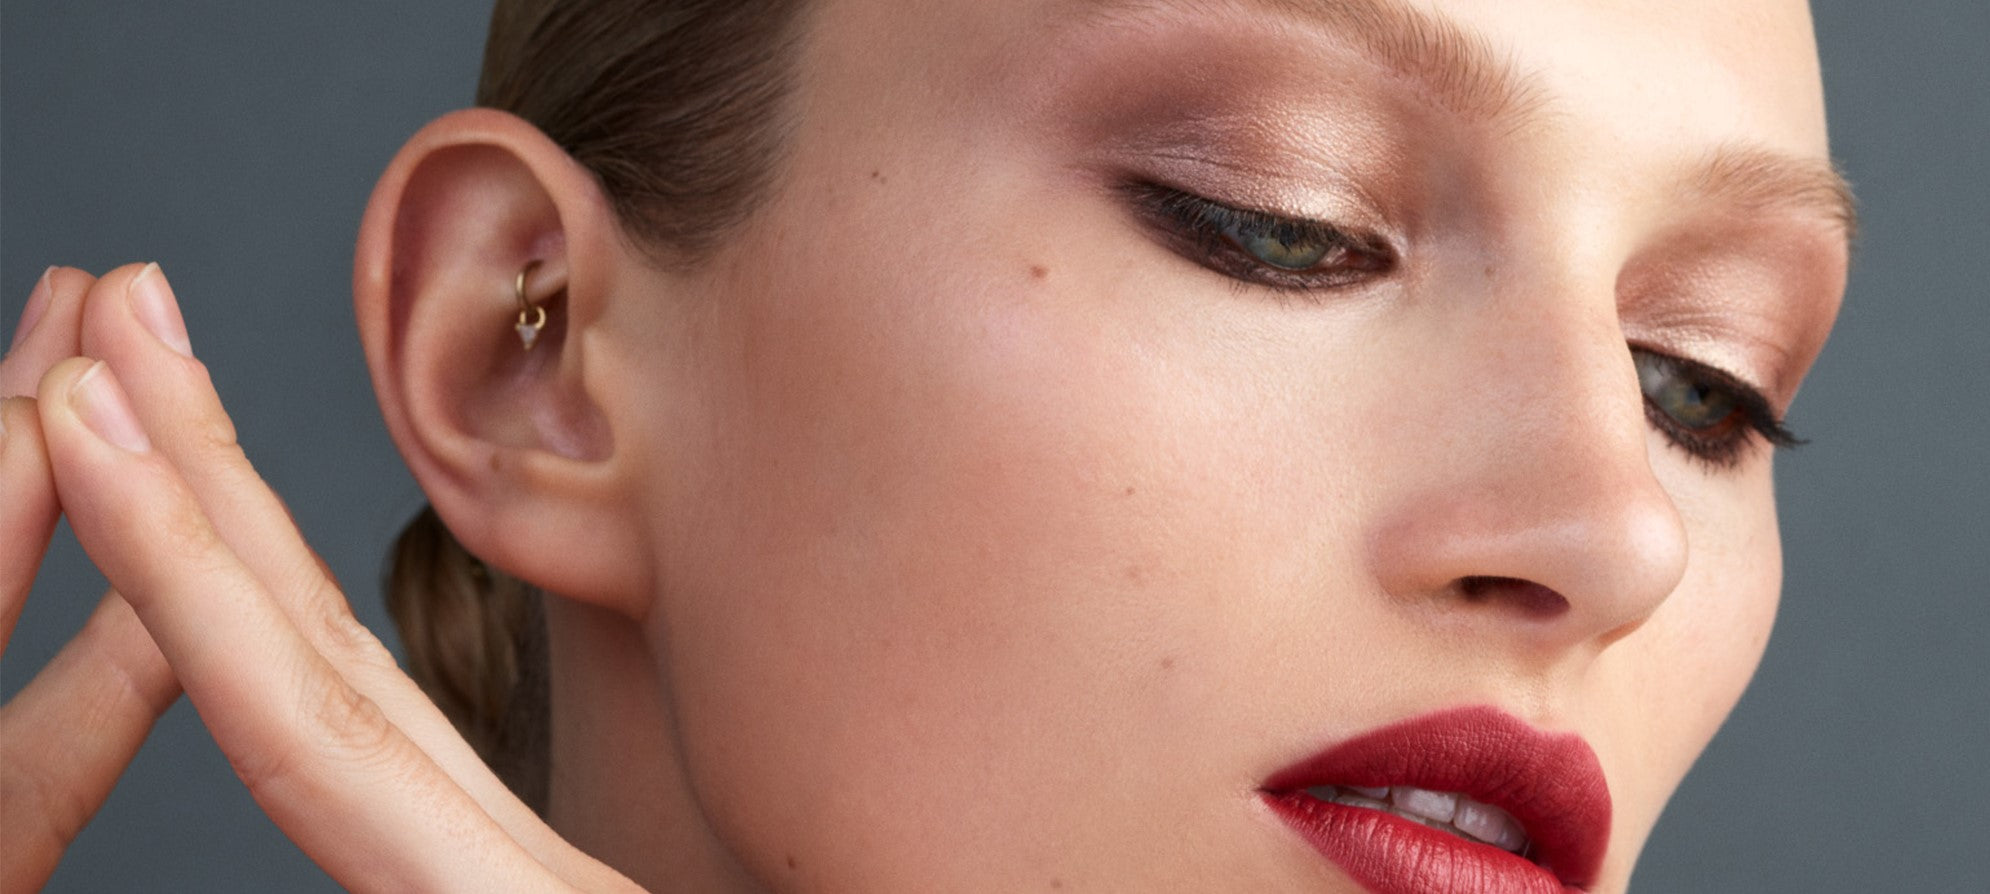 These White Eyeliner Makeup Looks For Fall Will Refresh Your Moody Beauty  Routine